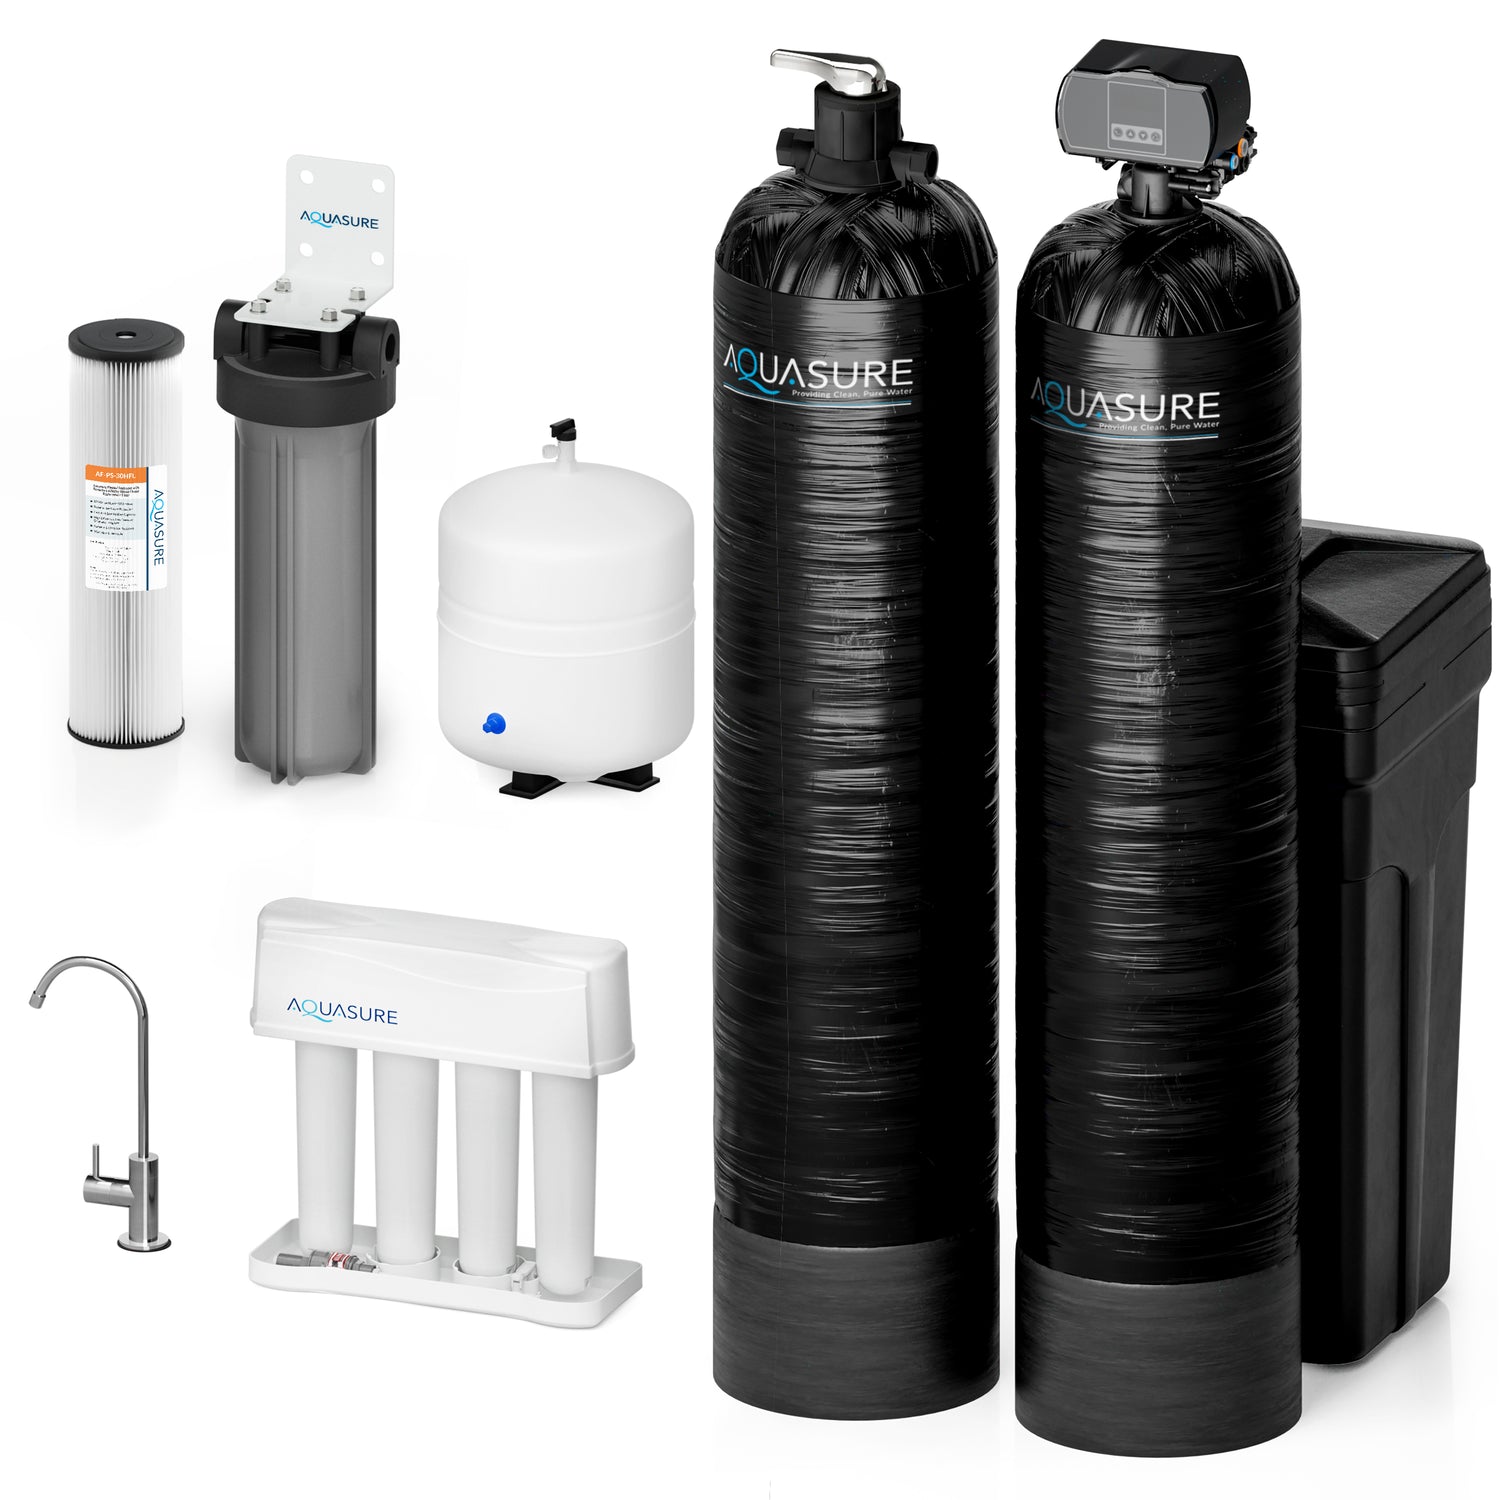 Signature Elite | 1,500,000 Gallons Whole House Water Filter Treatment Bundle with 64,000 Grains Softener w/ Fine Mesh Resin, 75 GPD Reverse Osmosis System